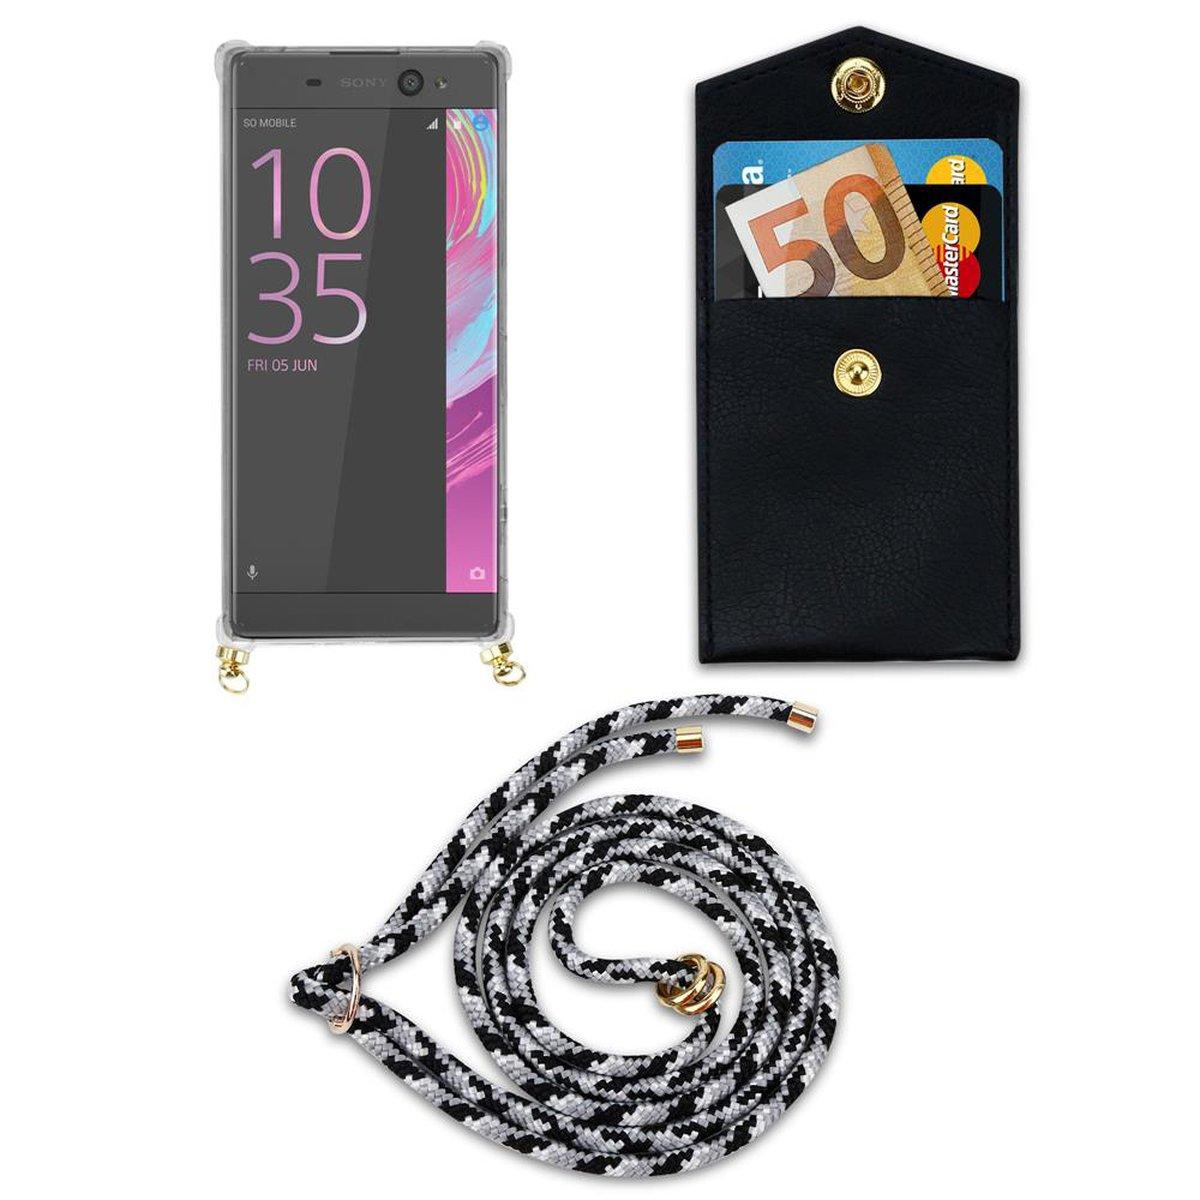 Sony, Kette Kordel abnehmbarer Band SCHWARZ XA, Hülle, Handy CADORABO Gold Backcover, mit Xperia CAMOUFLAGE und Ringen,